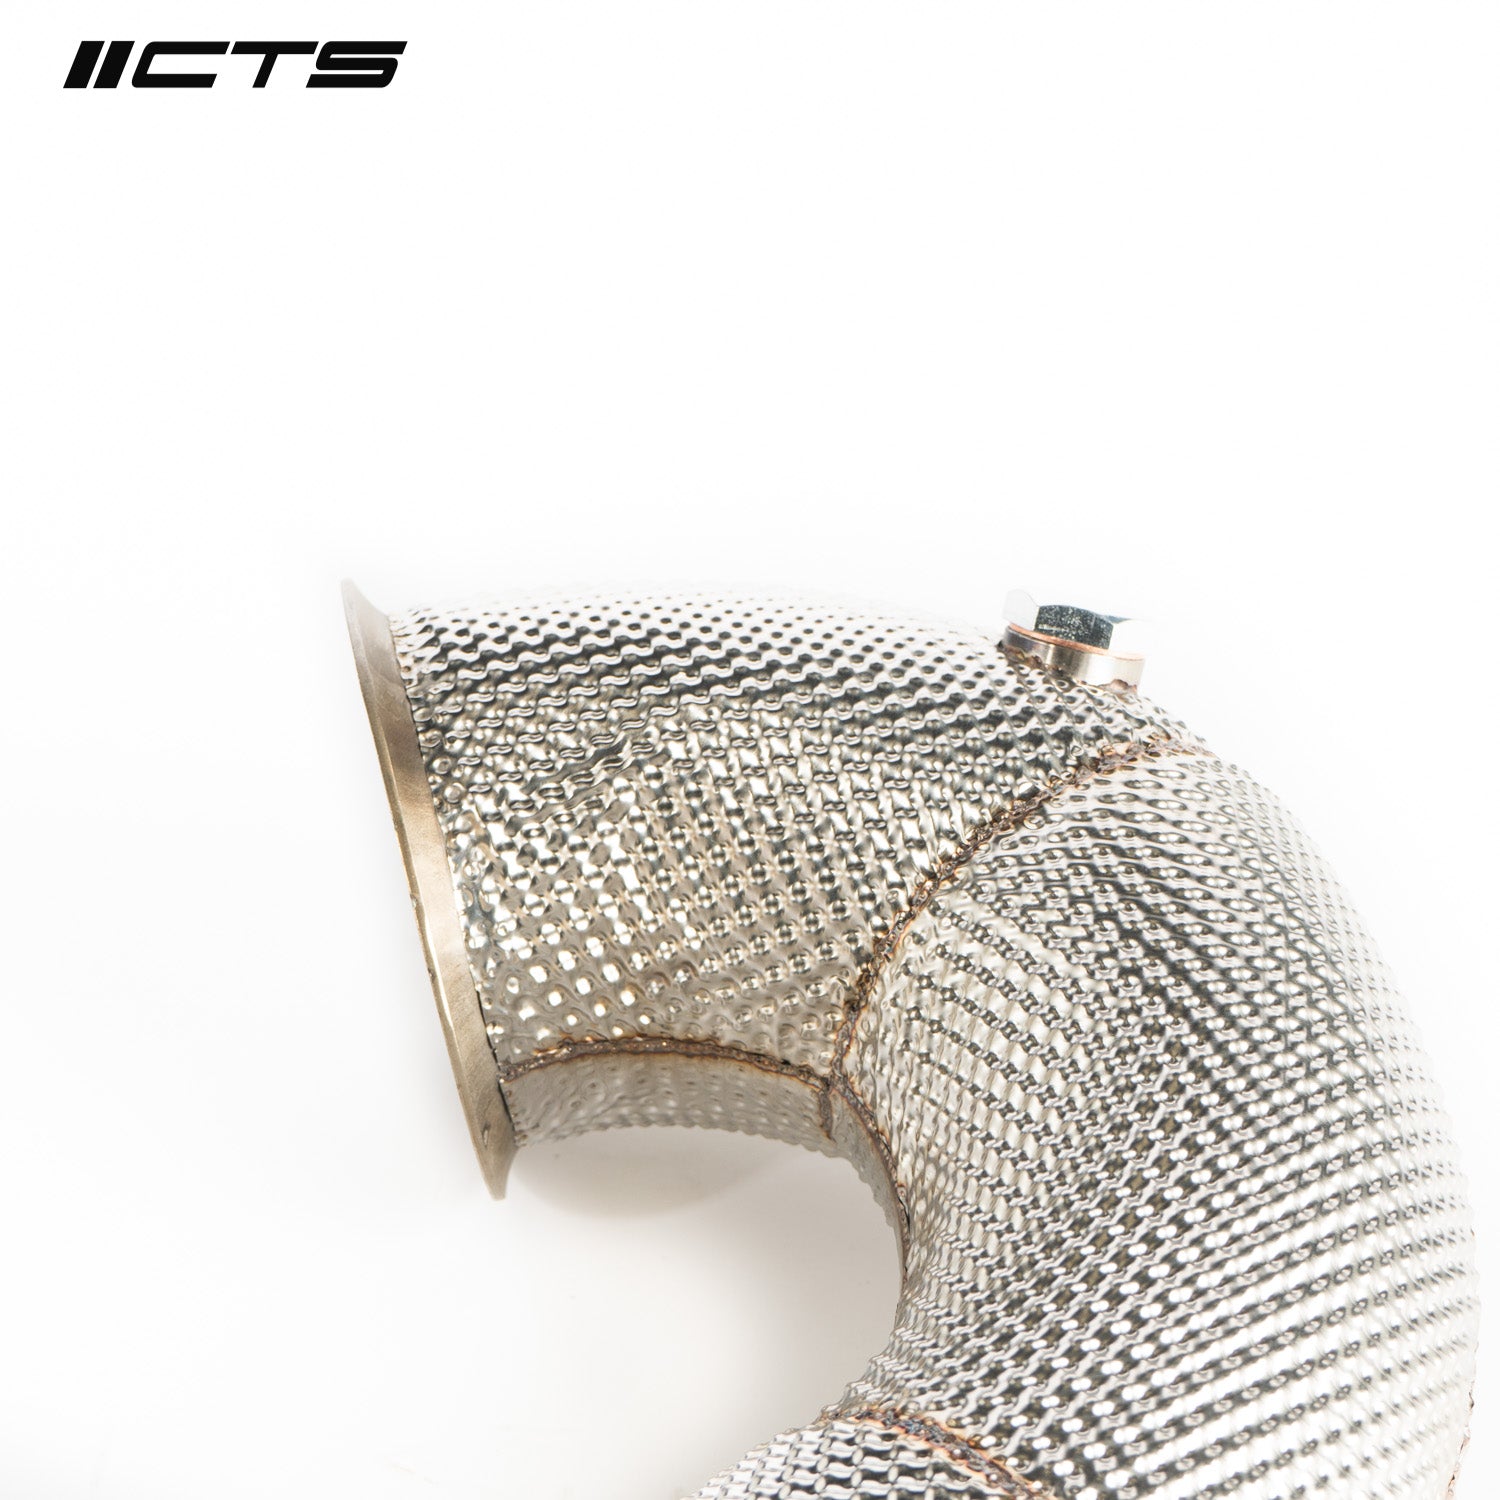 CTS TURBO MERCEDES-BENZ M133 A45/CLA45/GLA45 AMG DOWNPIPE HIGH-FLOW CAT - 0